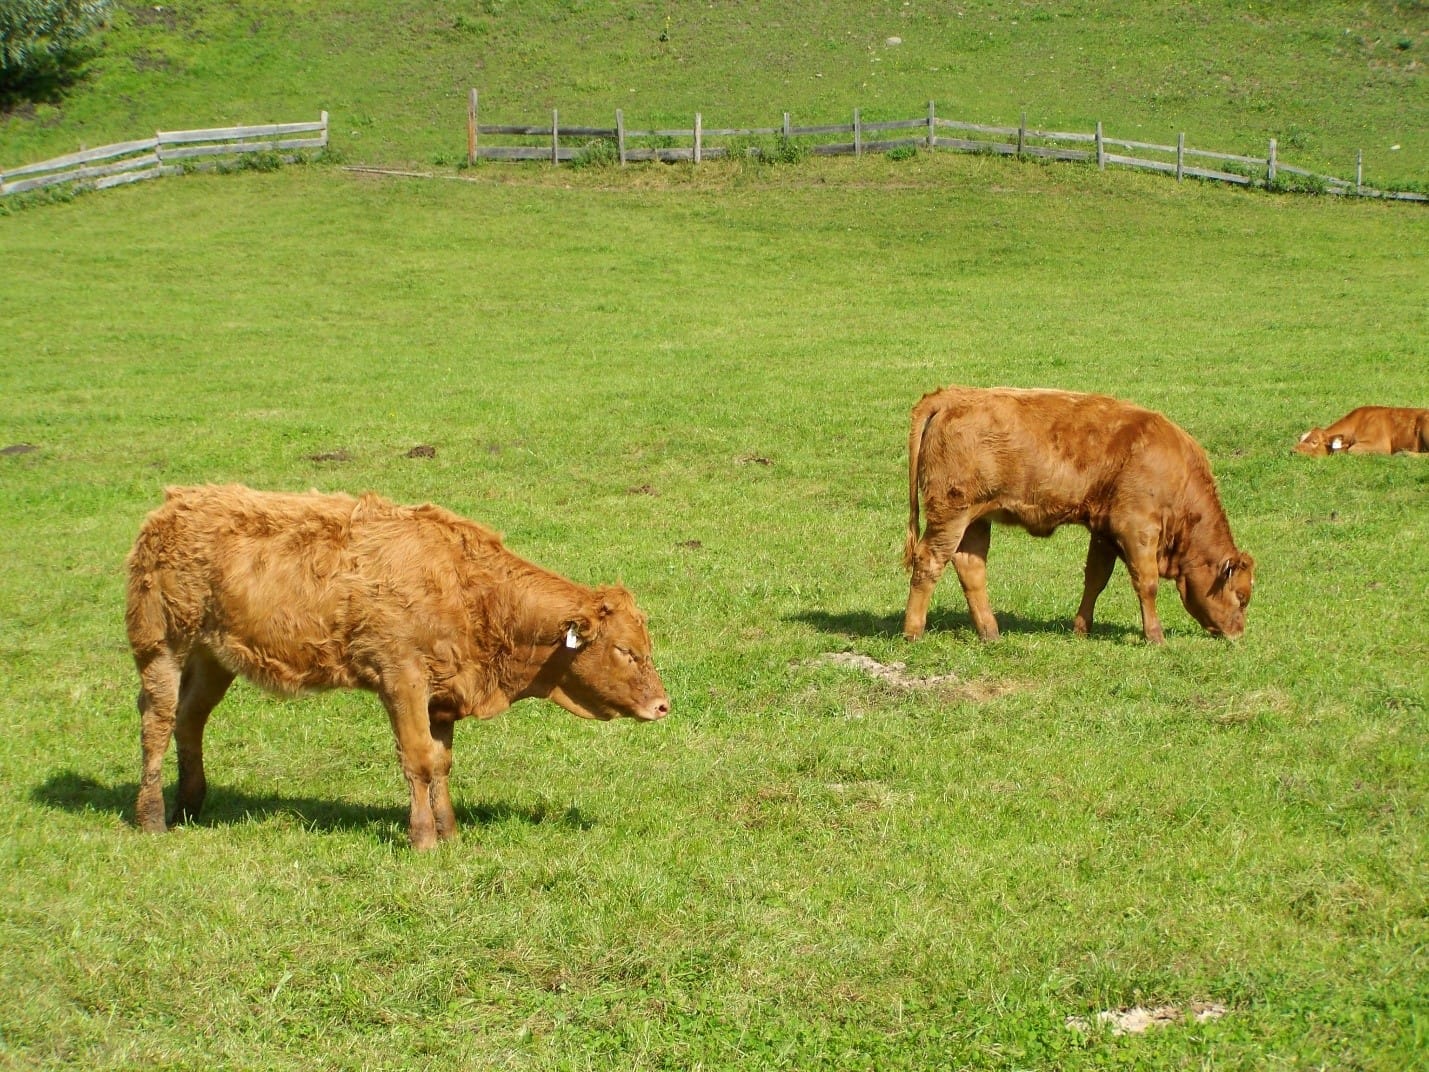 In strip grazing, calves are allowed to access certain parts of pasture through a small entry.